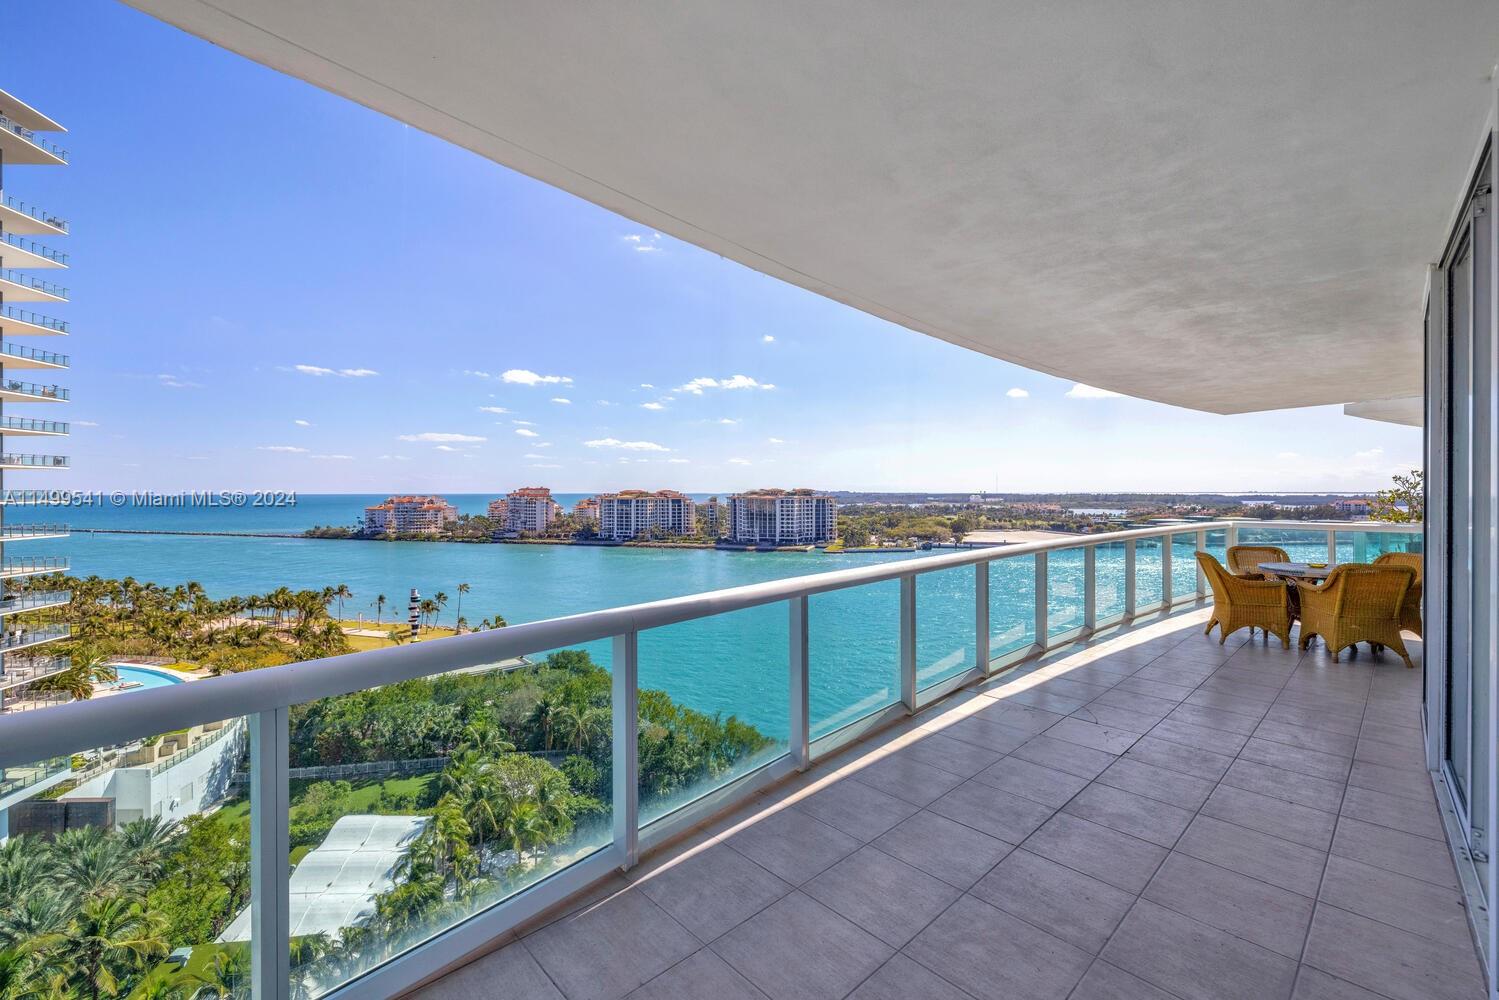 Enjoy spectacular water views from every room in this highly sought after, and rarely available, 05 line at Murano Portofino. Great opportunity to live or have a second home in the luxurious South of Fifth neighborhood. A very similar unit with original finishes came on the market in October and sold immediately.  This unit is 3 floors above giving it even nicer views. Priced to sell.